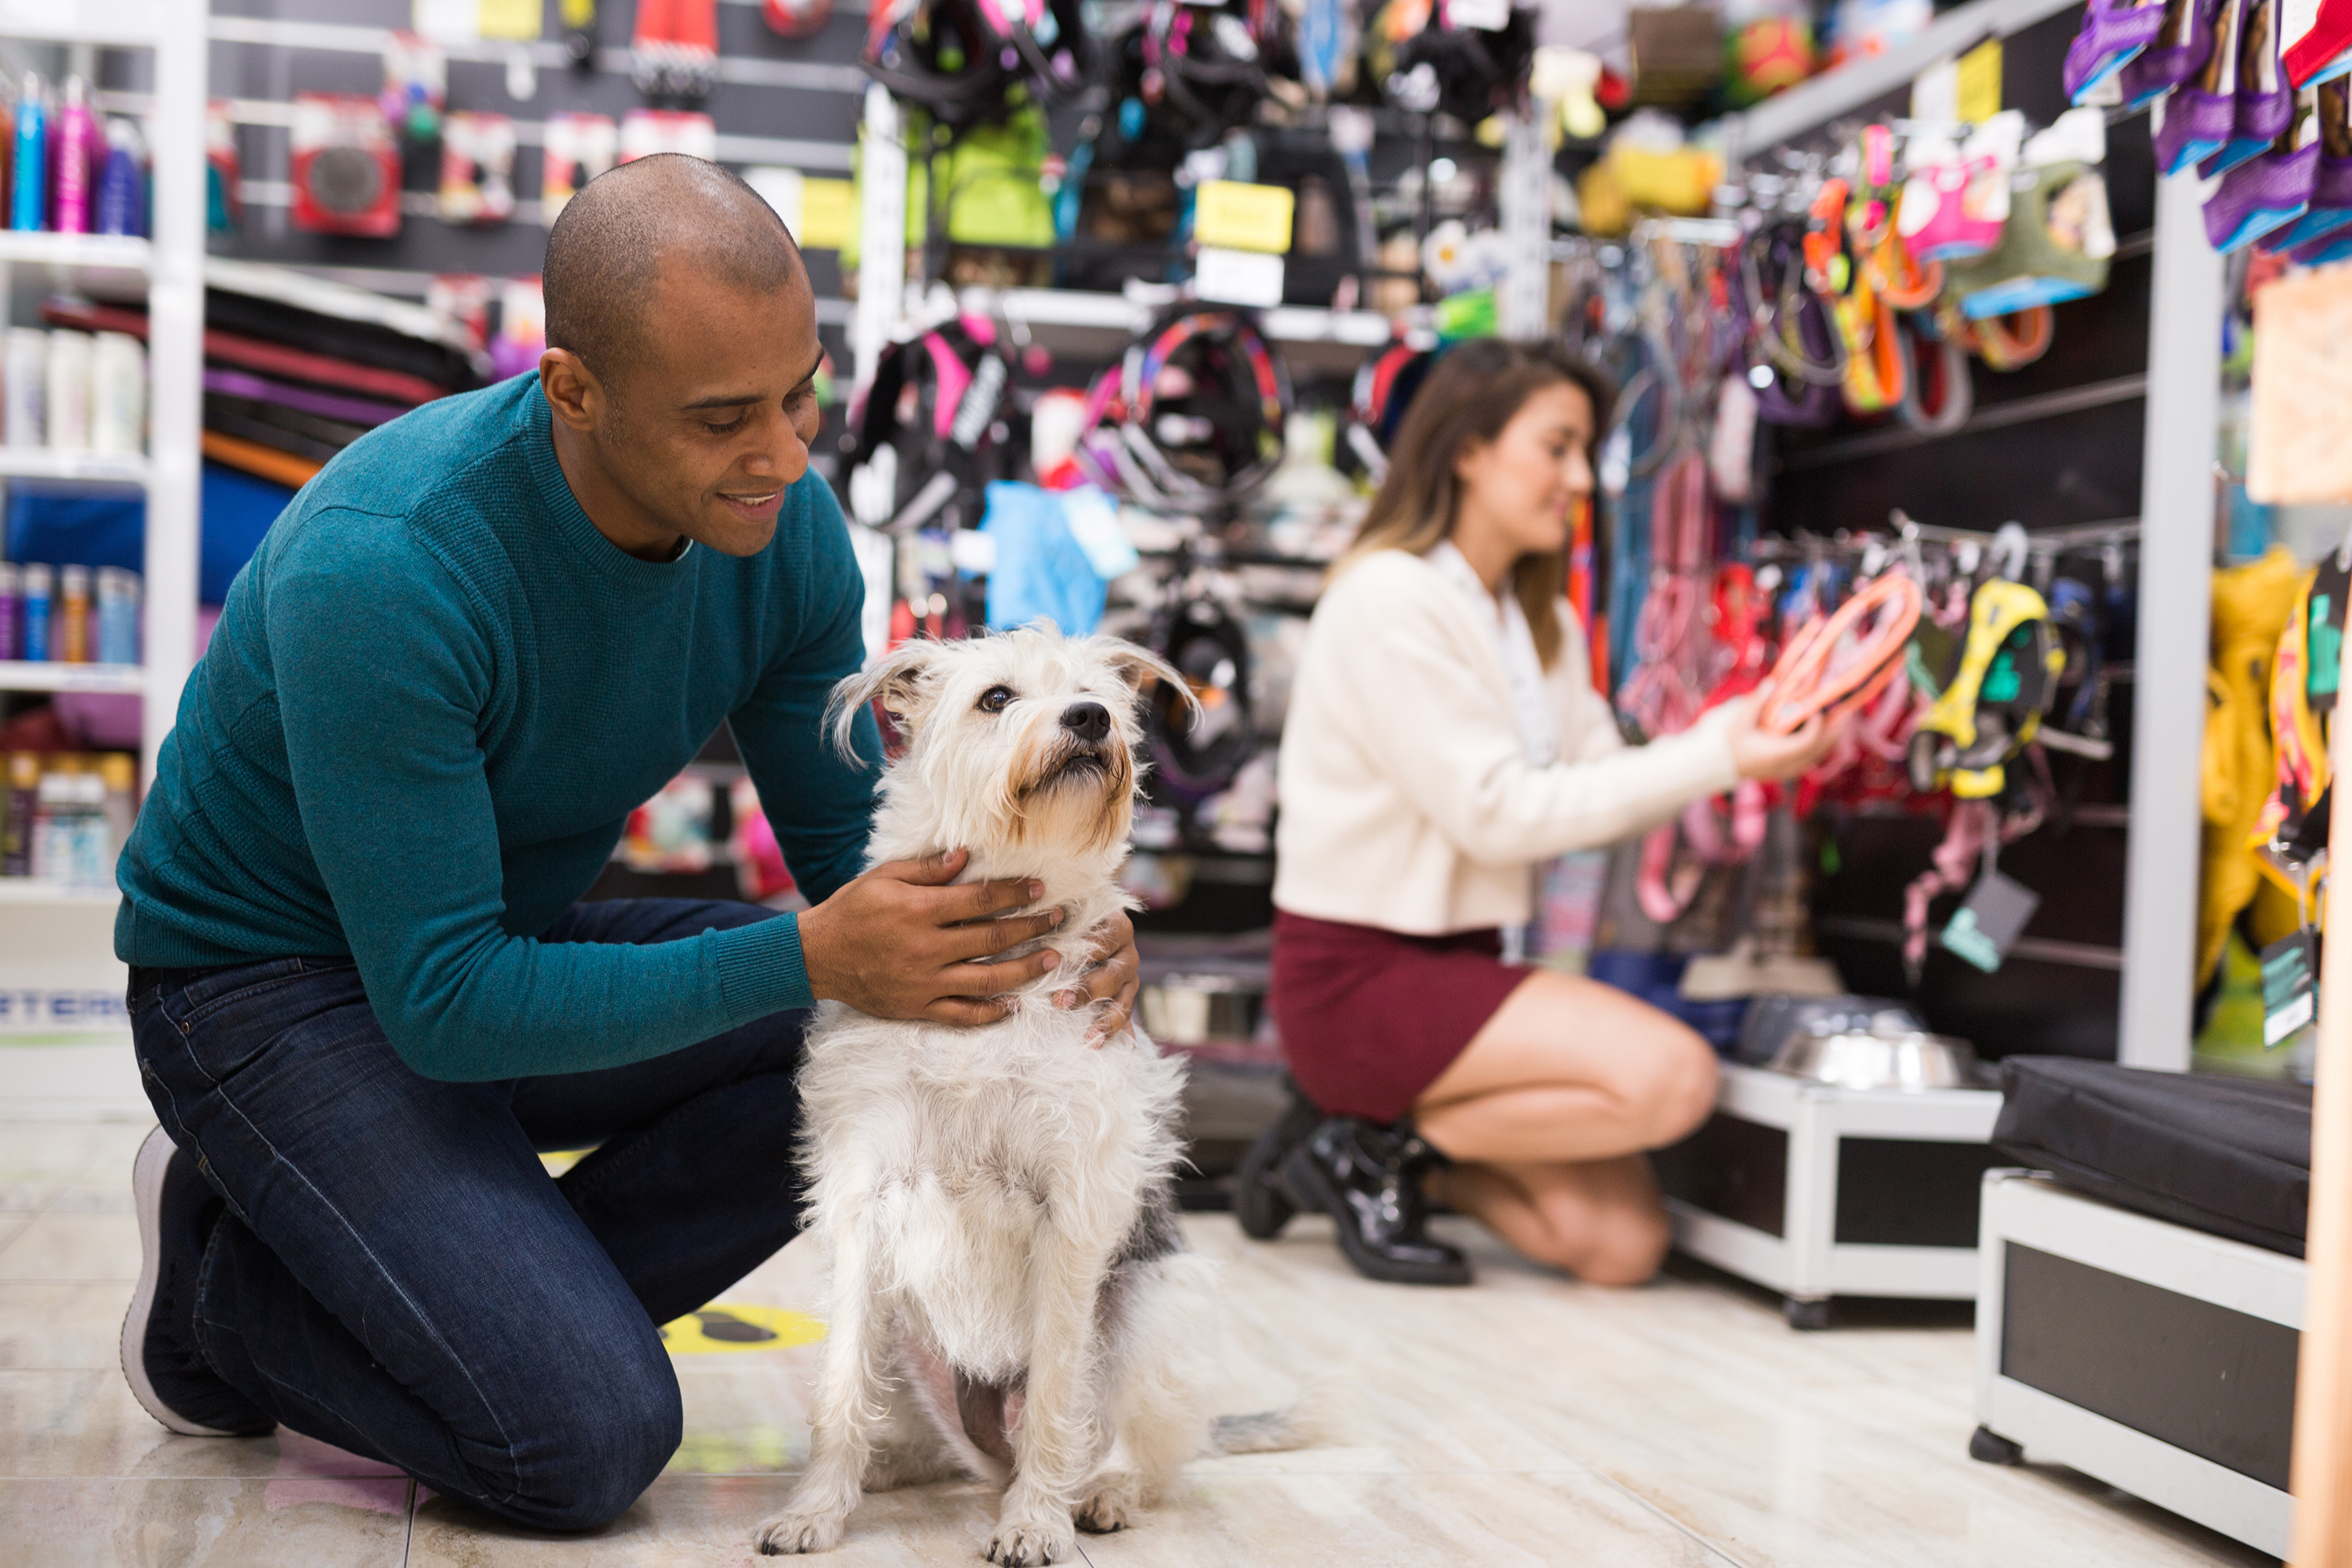 Man crouching to pet his dog in a pet store